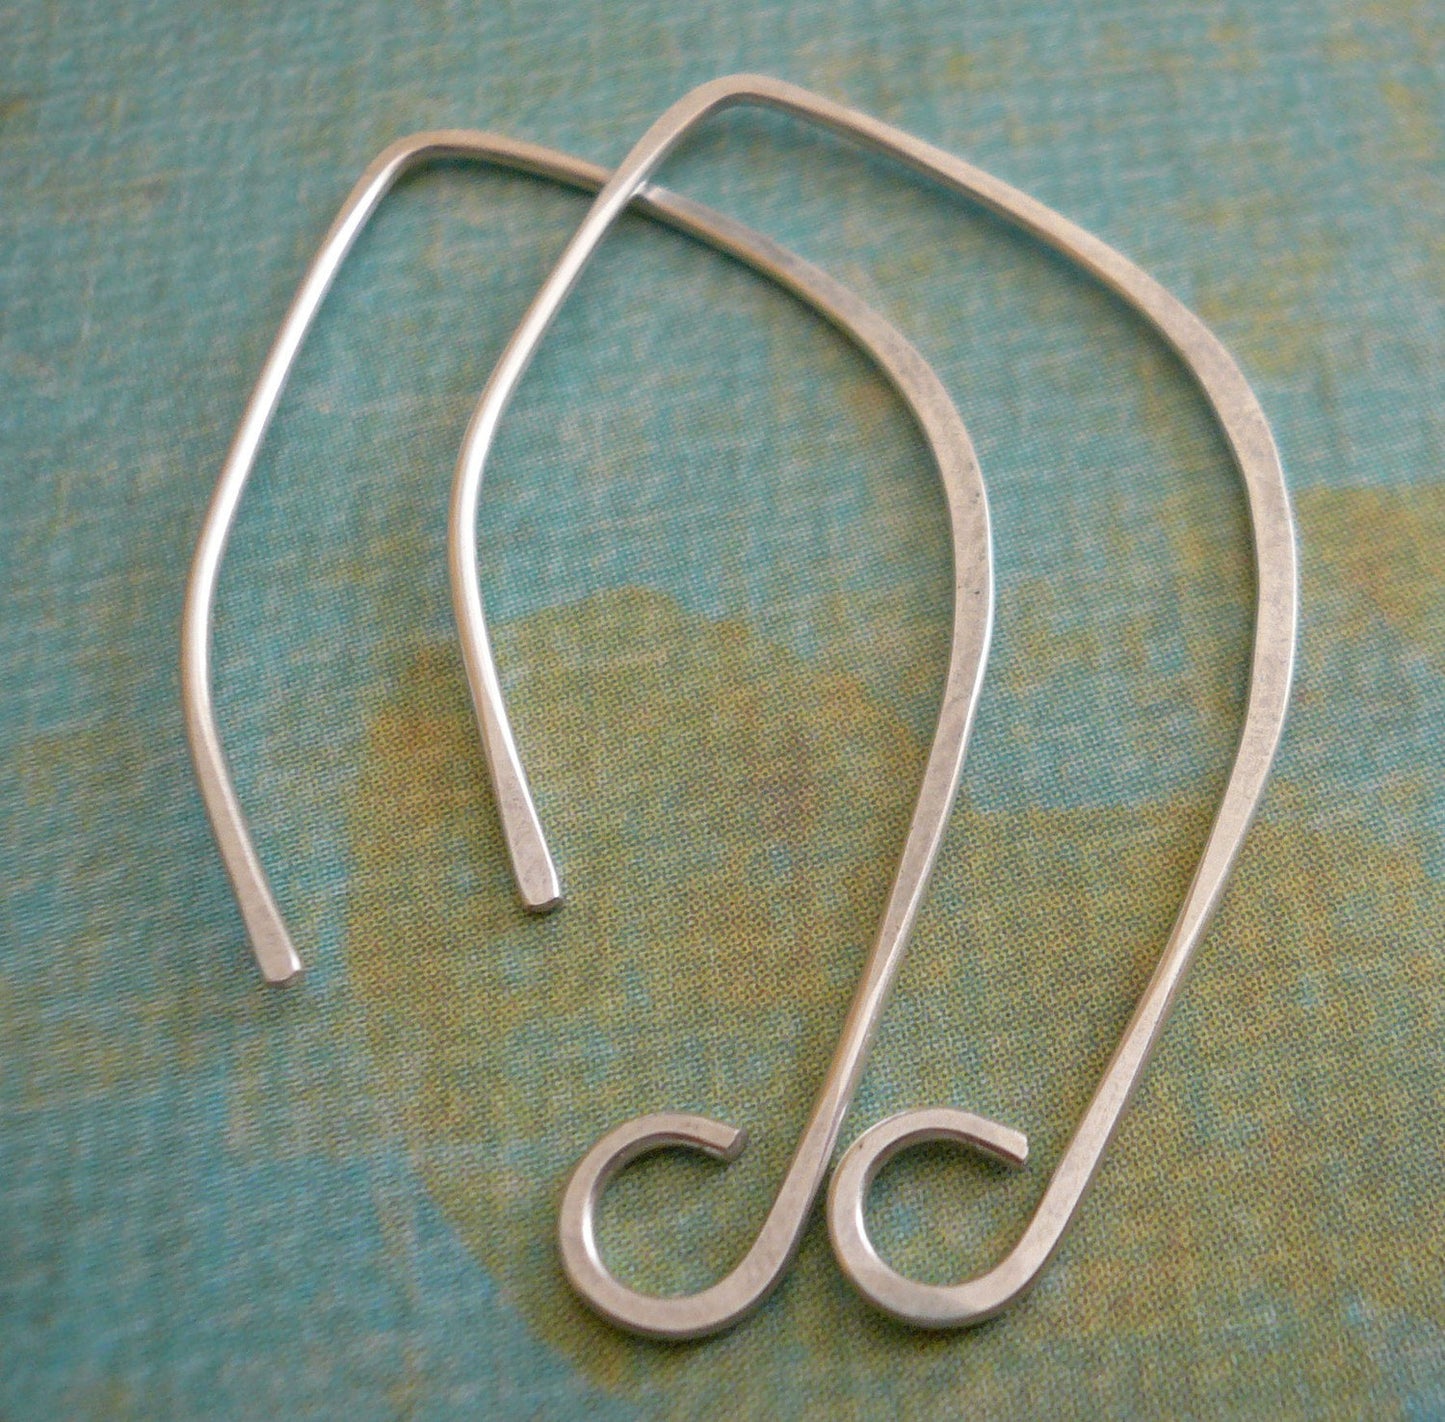 12 Pairs of my Hint Sterling Silver Earwires - Handmade. Handforged